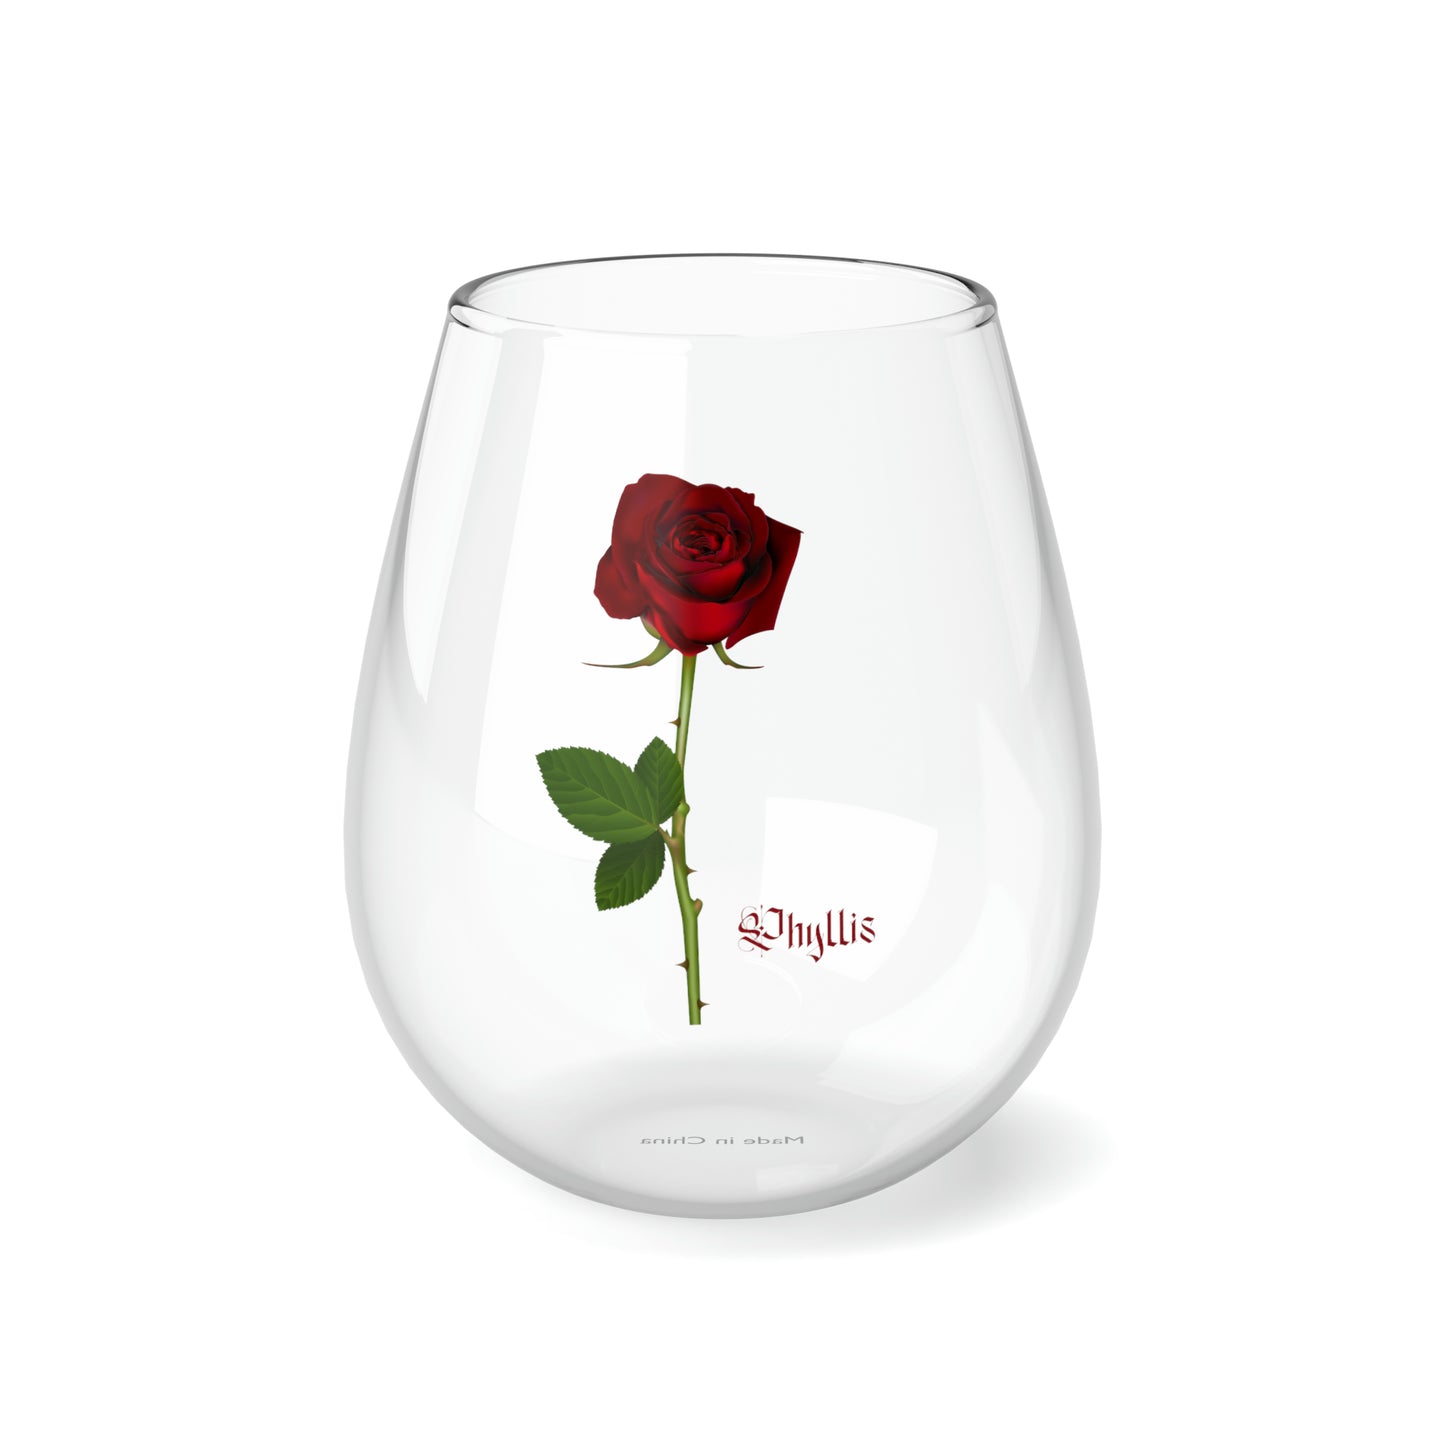 June PERSONALIZED Birth Flower Wine Glass, Birth Flower Gifts, Birth Flower wine glass, Birth Flower Gifts for Women, Gift for coworker, sister gift, birthday gift, Valentine gift, Stemless Wine Glass, 11.75oz